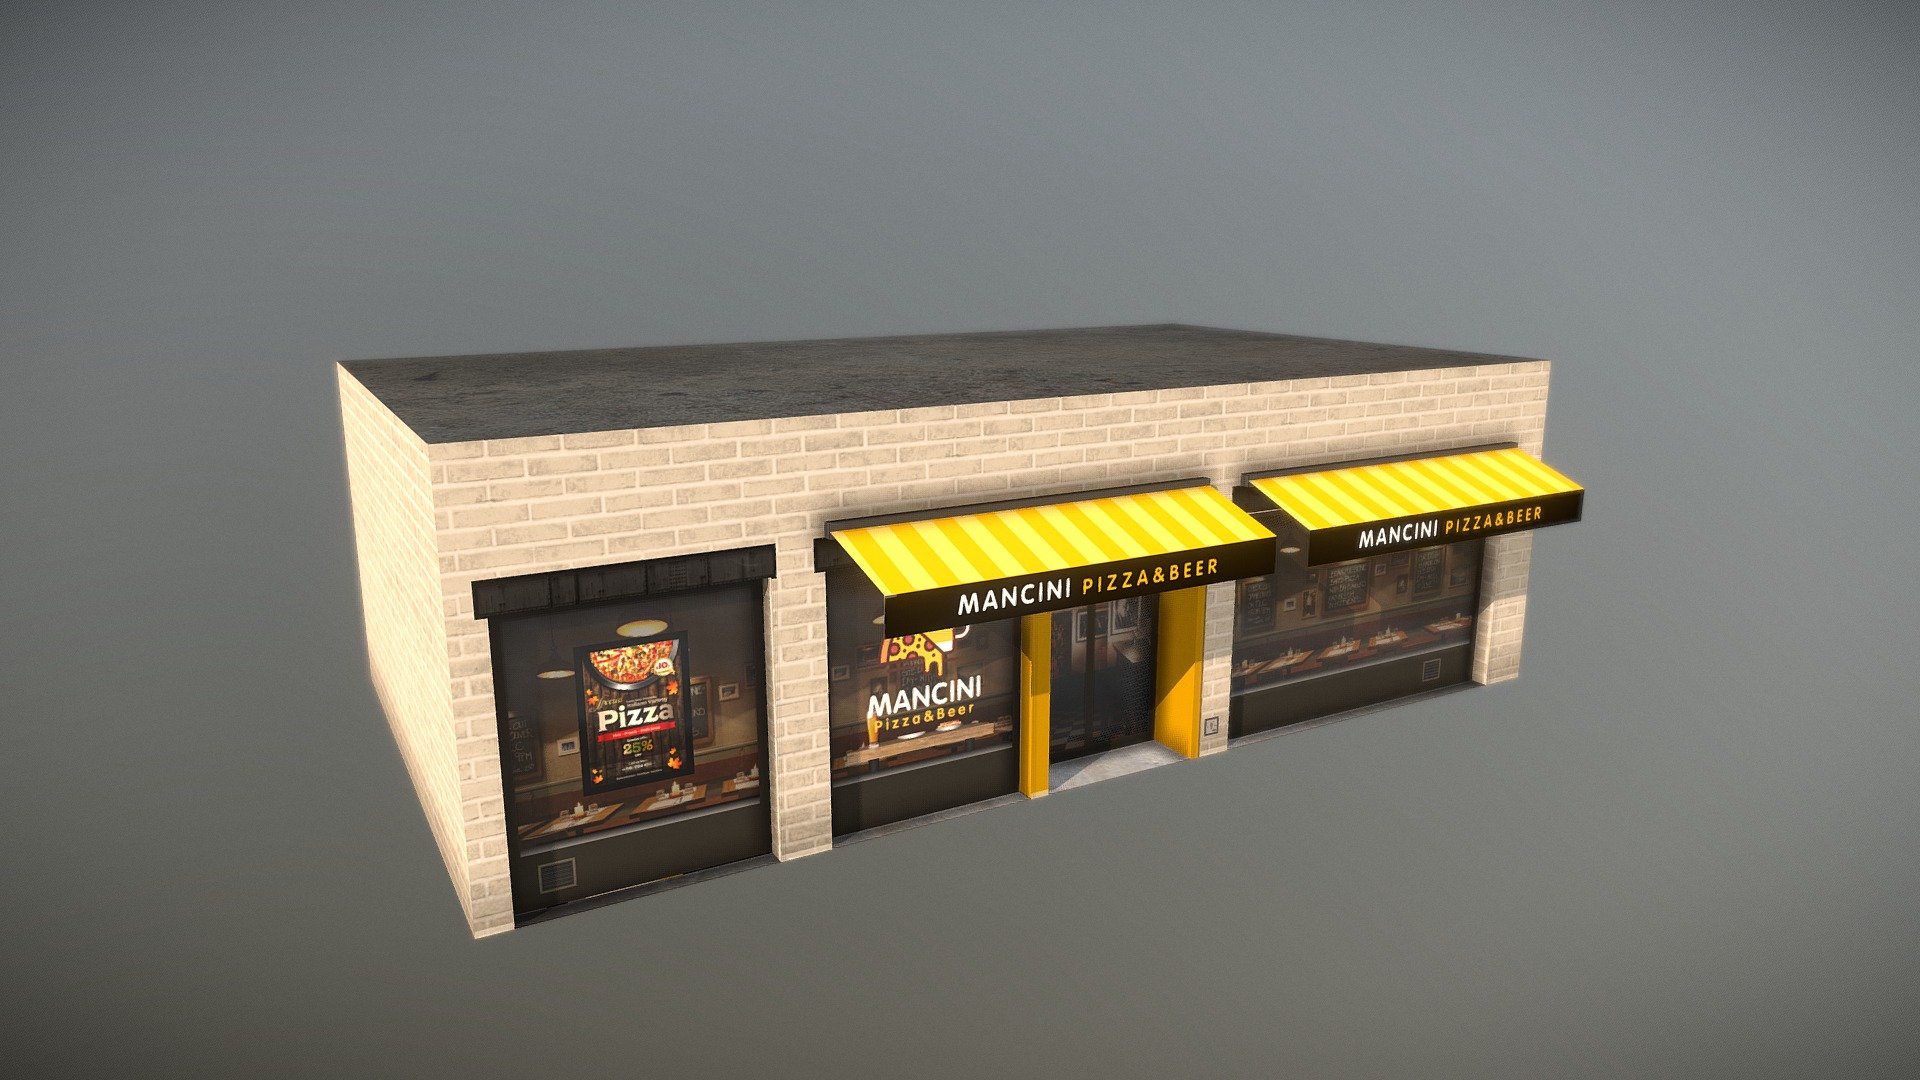 A (fictive) modern pizzeria which offers wood-fired pizzas and beers from all around the world (as well as delicious sodas for kids).
Asset created for Cities: Skylines 3d model